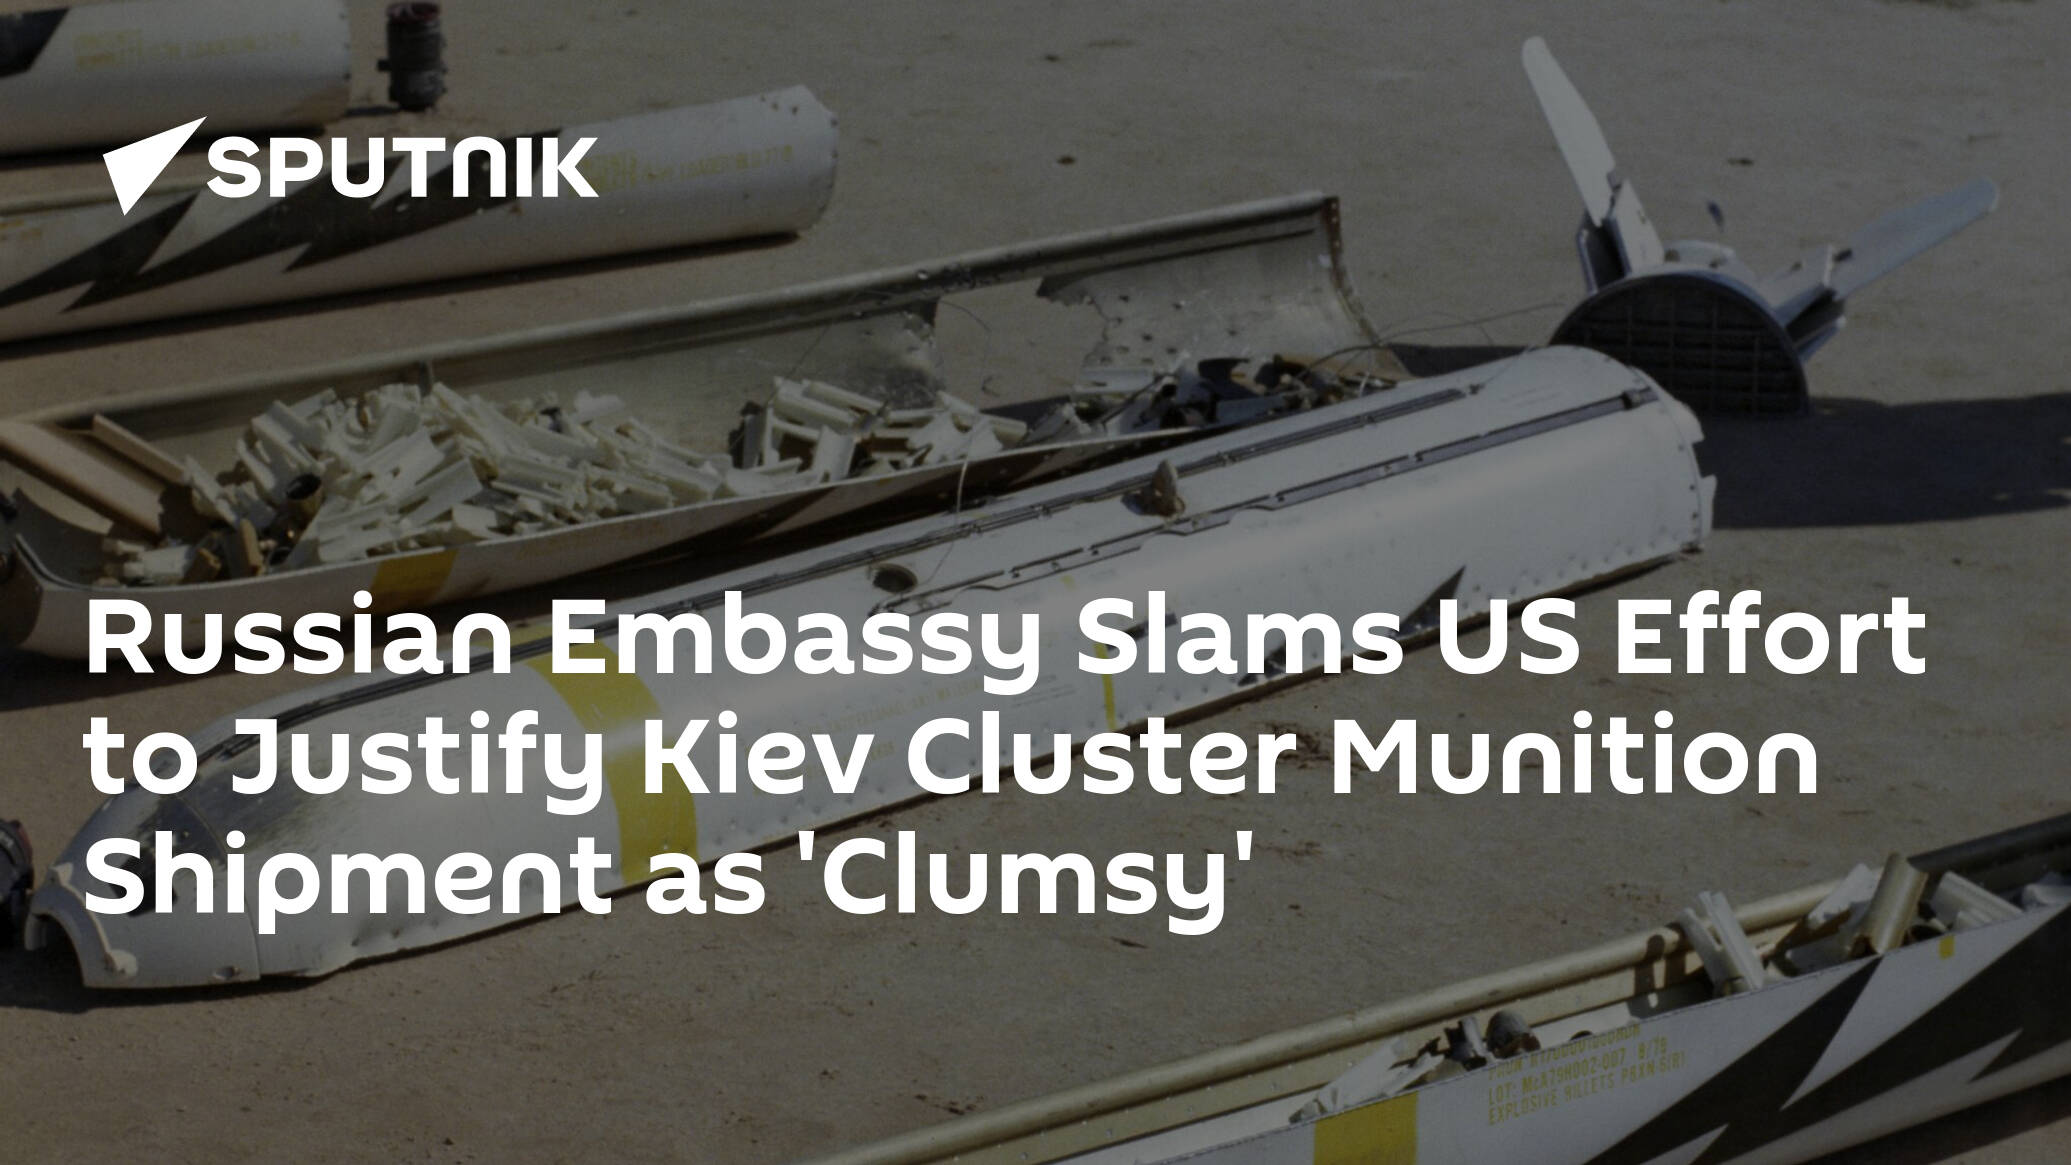 Russian Embassy Slams US Effort to Justify Kiev Cluster Munition Shipment as 'Clumsy'